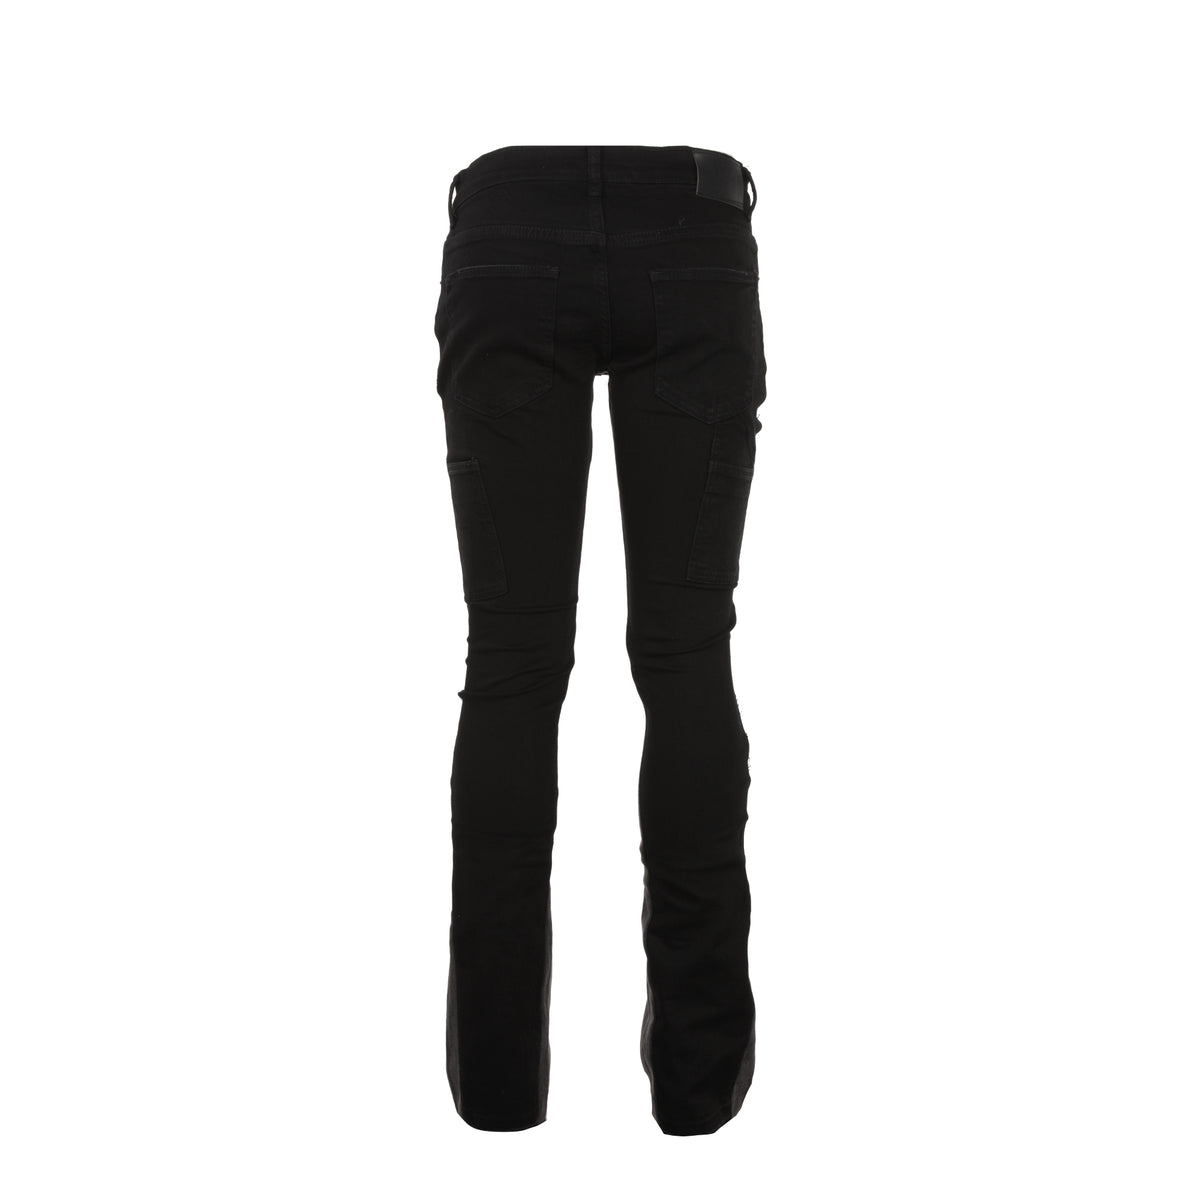 Valabasas "Nebula" Men's Stacked Jeans Black and Grey - SIZE Boutique